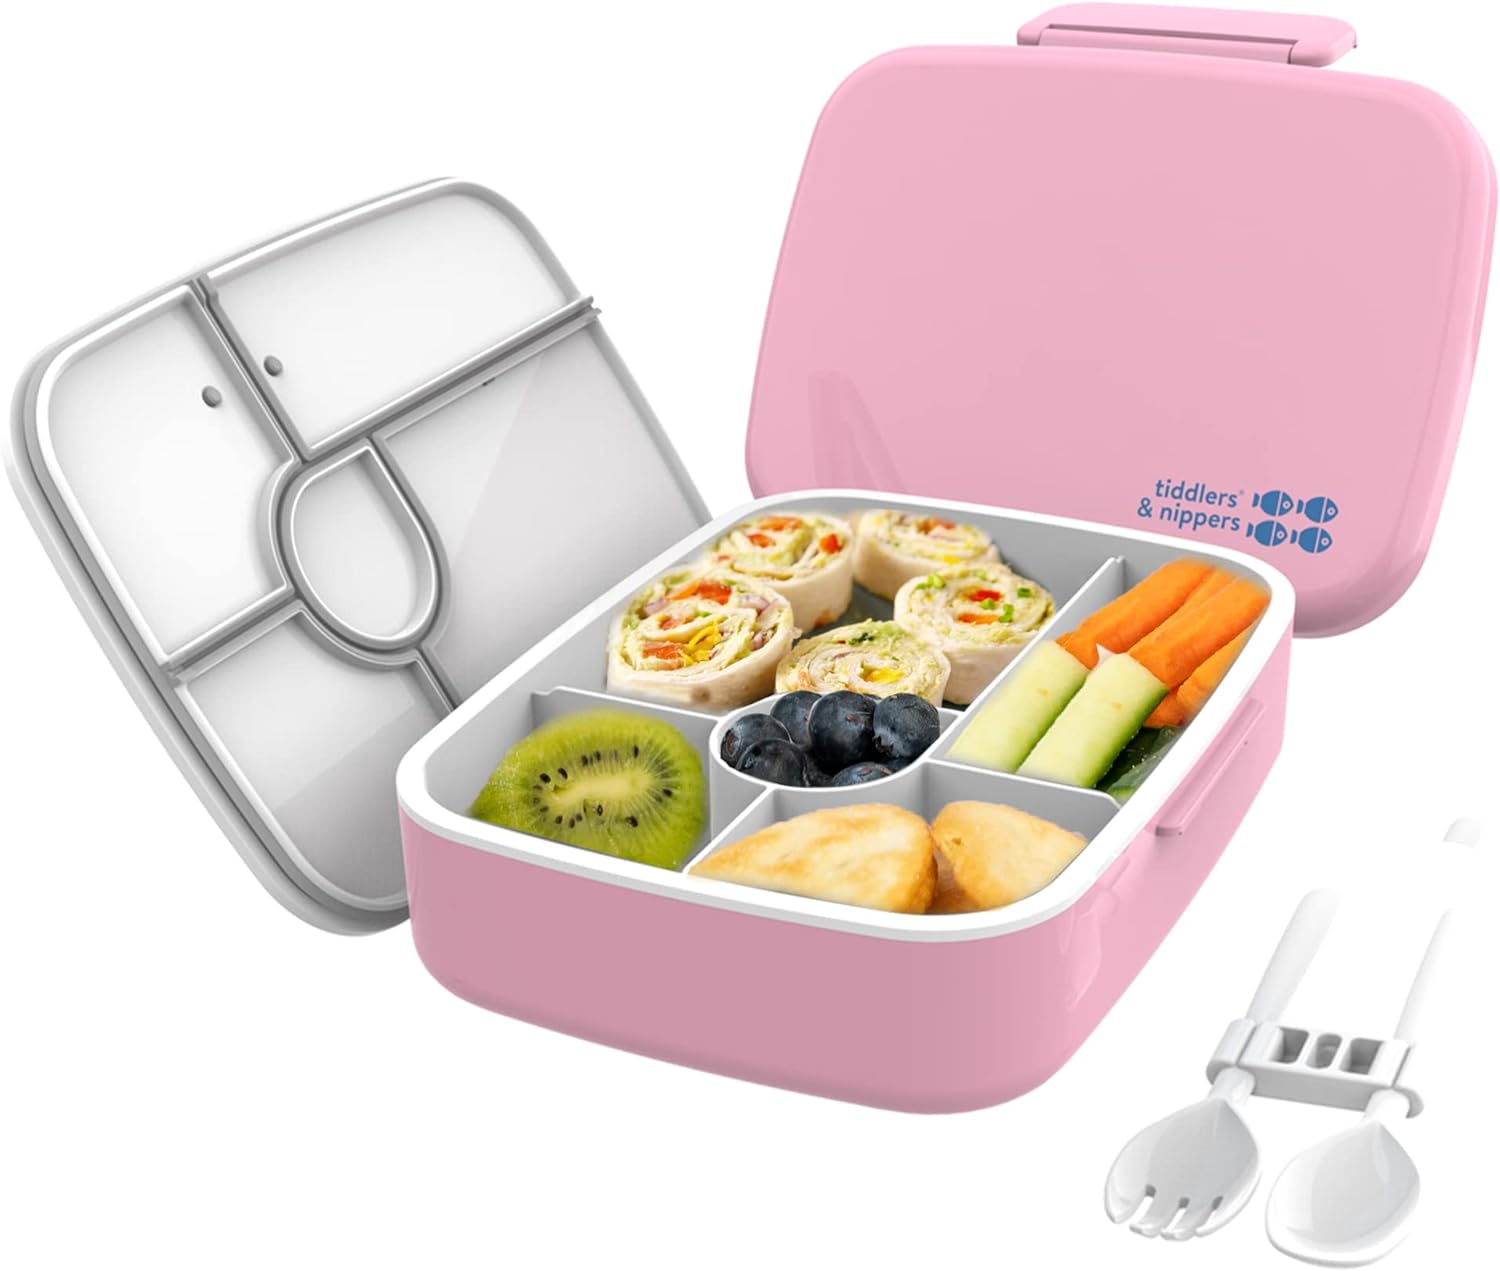 tiddlers & nippers 5 Compartment Lunch/Bento Box for Kids & Adults 3629